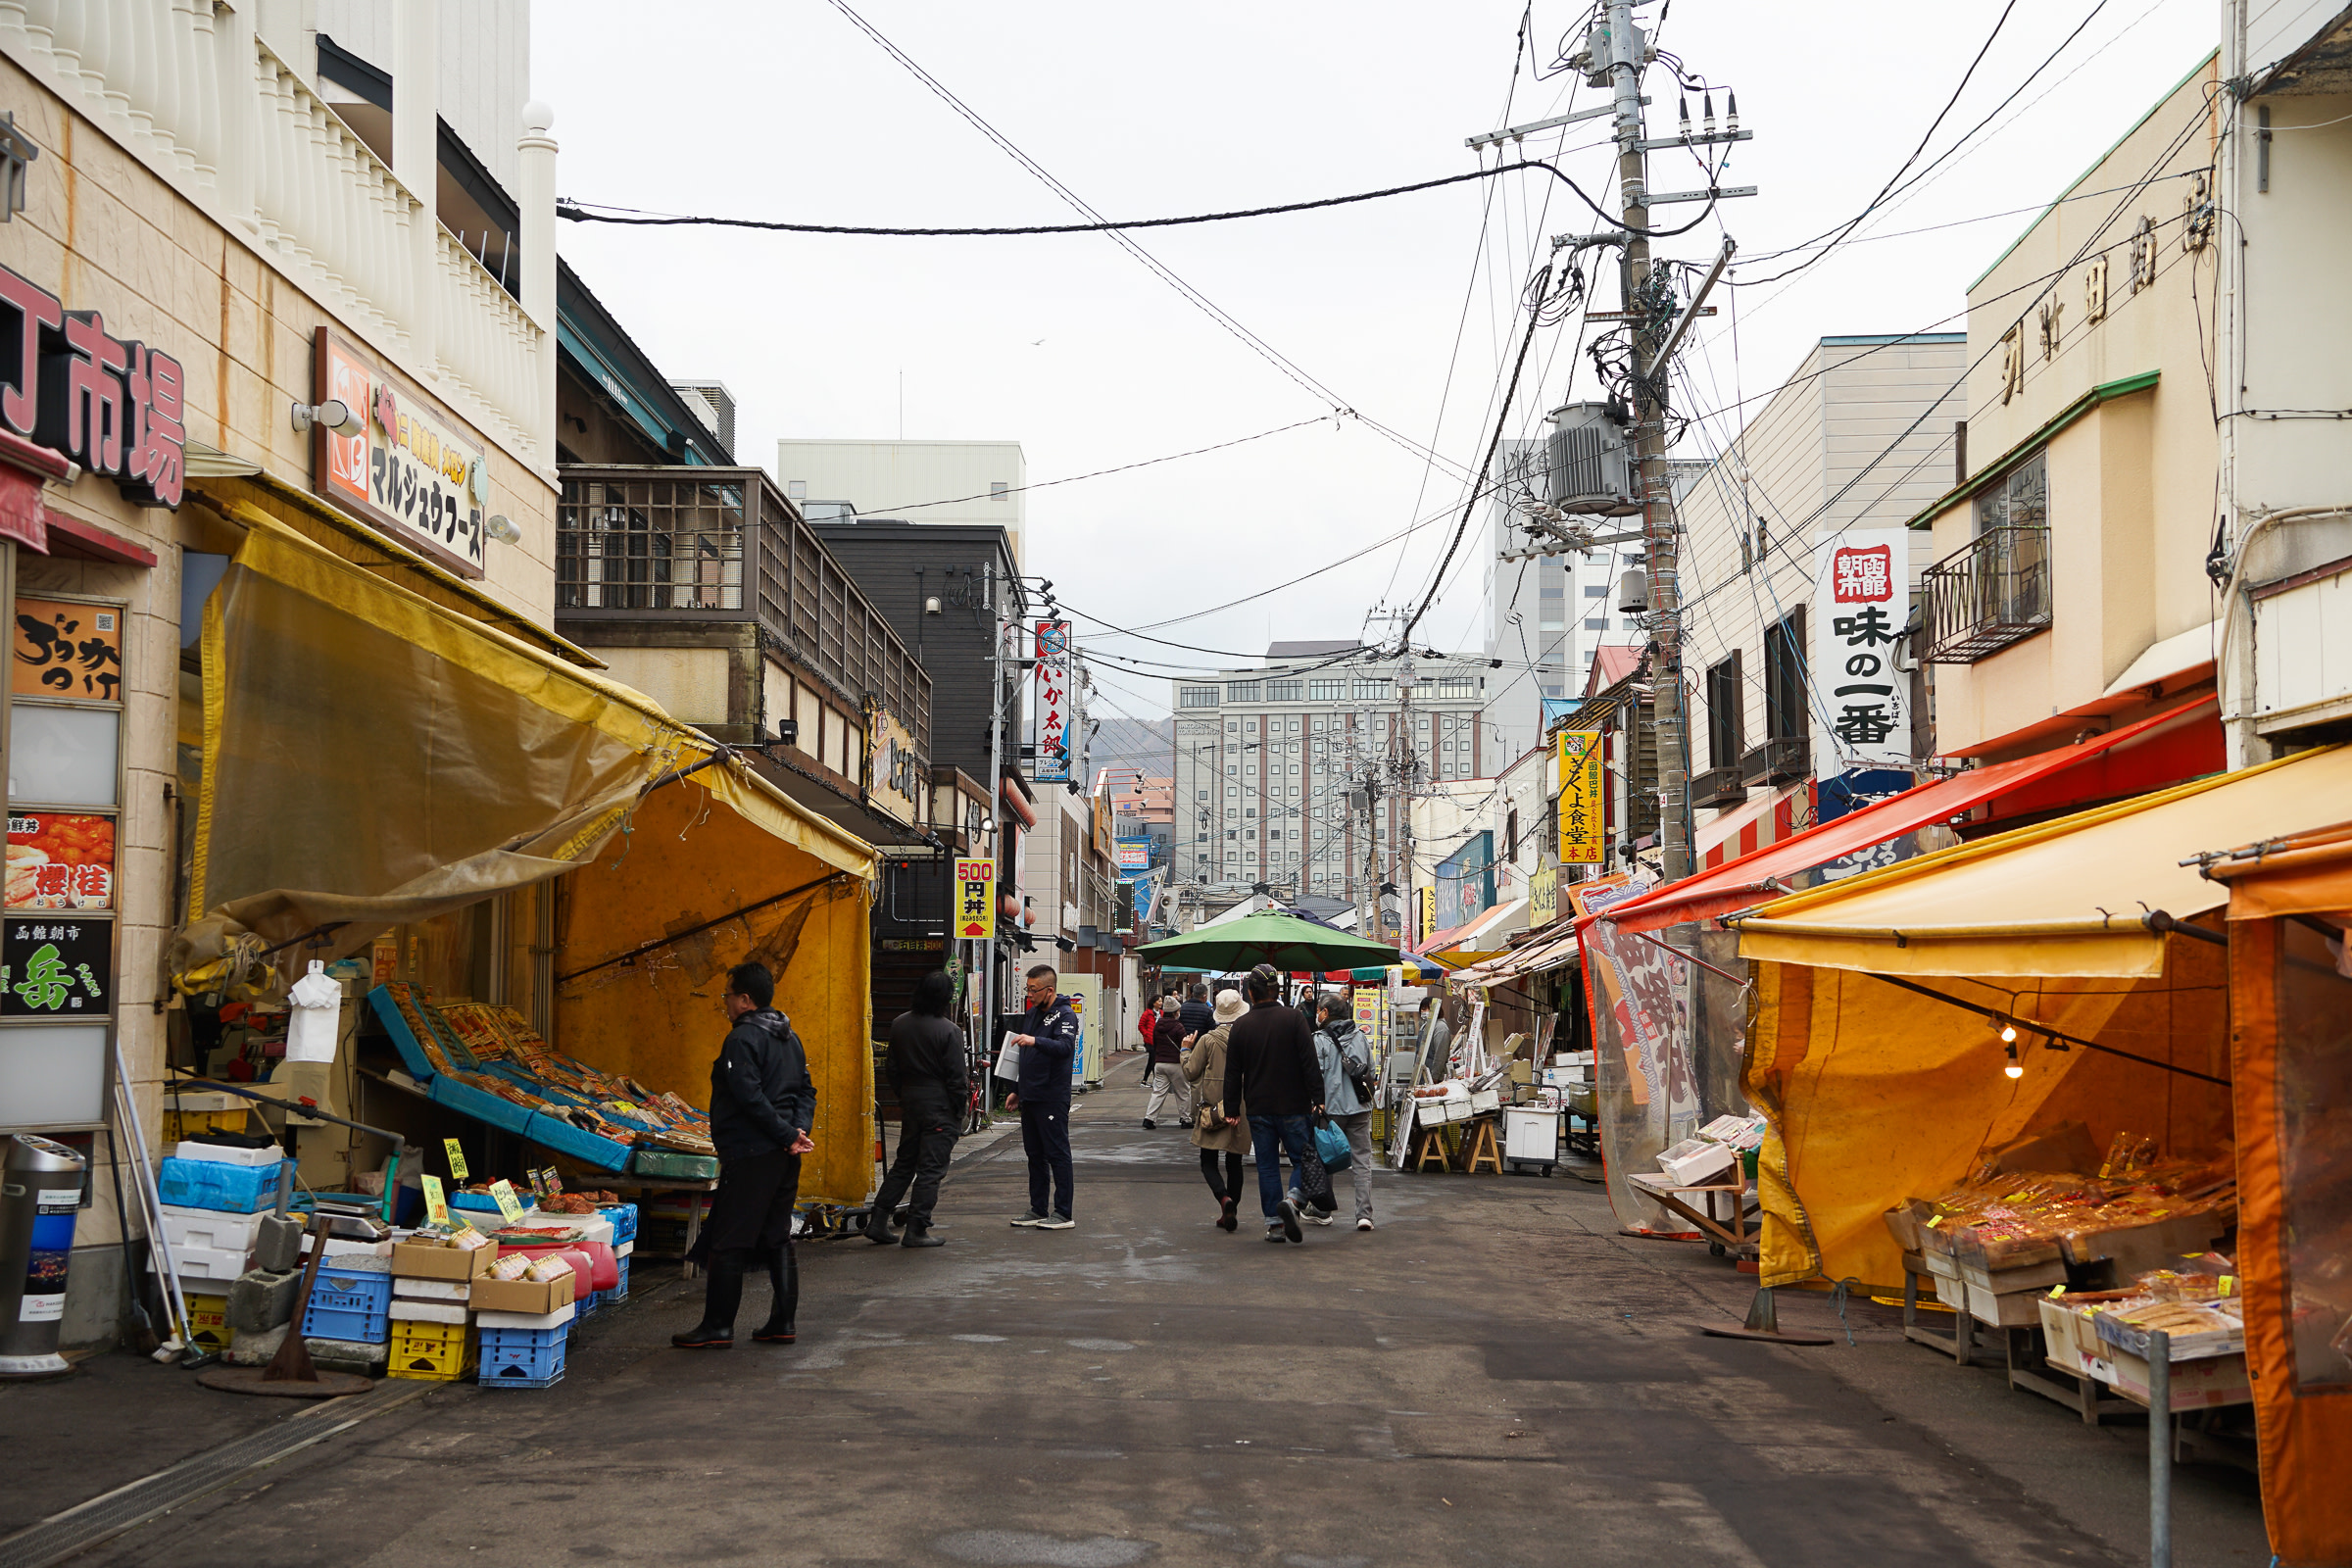 A road at Hakodate Morning Market. Large tarpaulin stands line the street, sheltering today's produce.